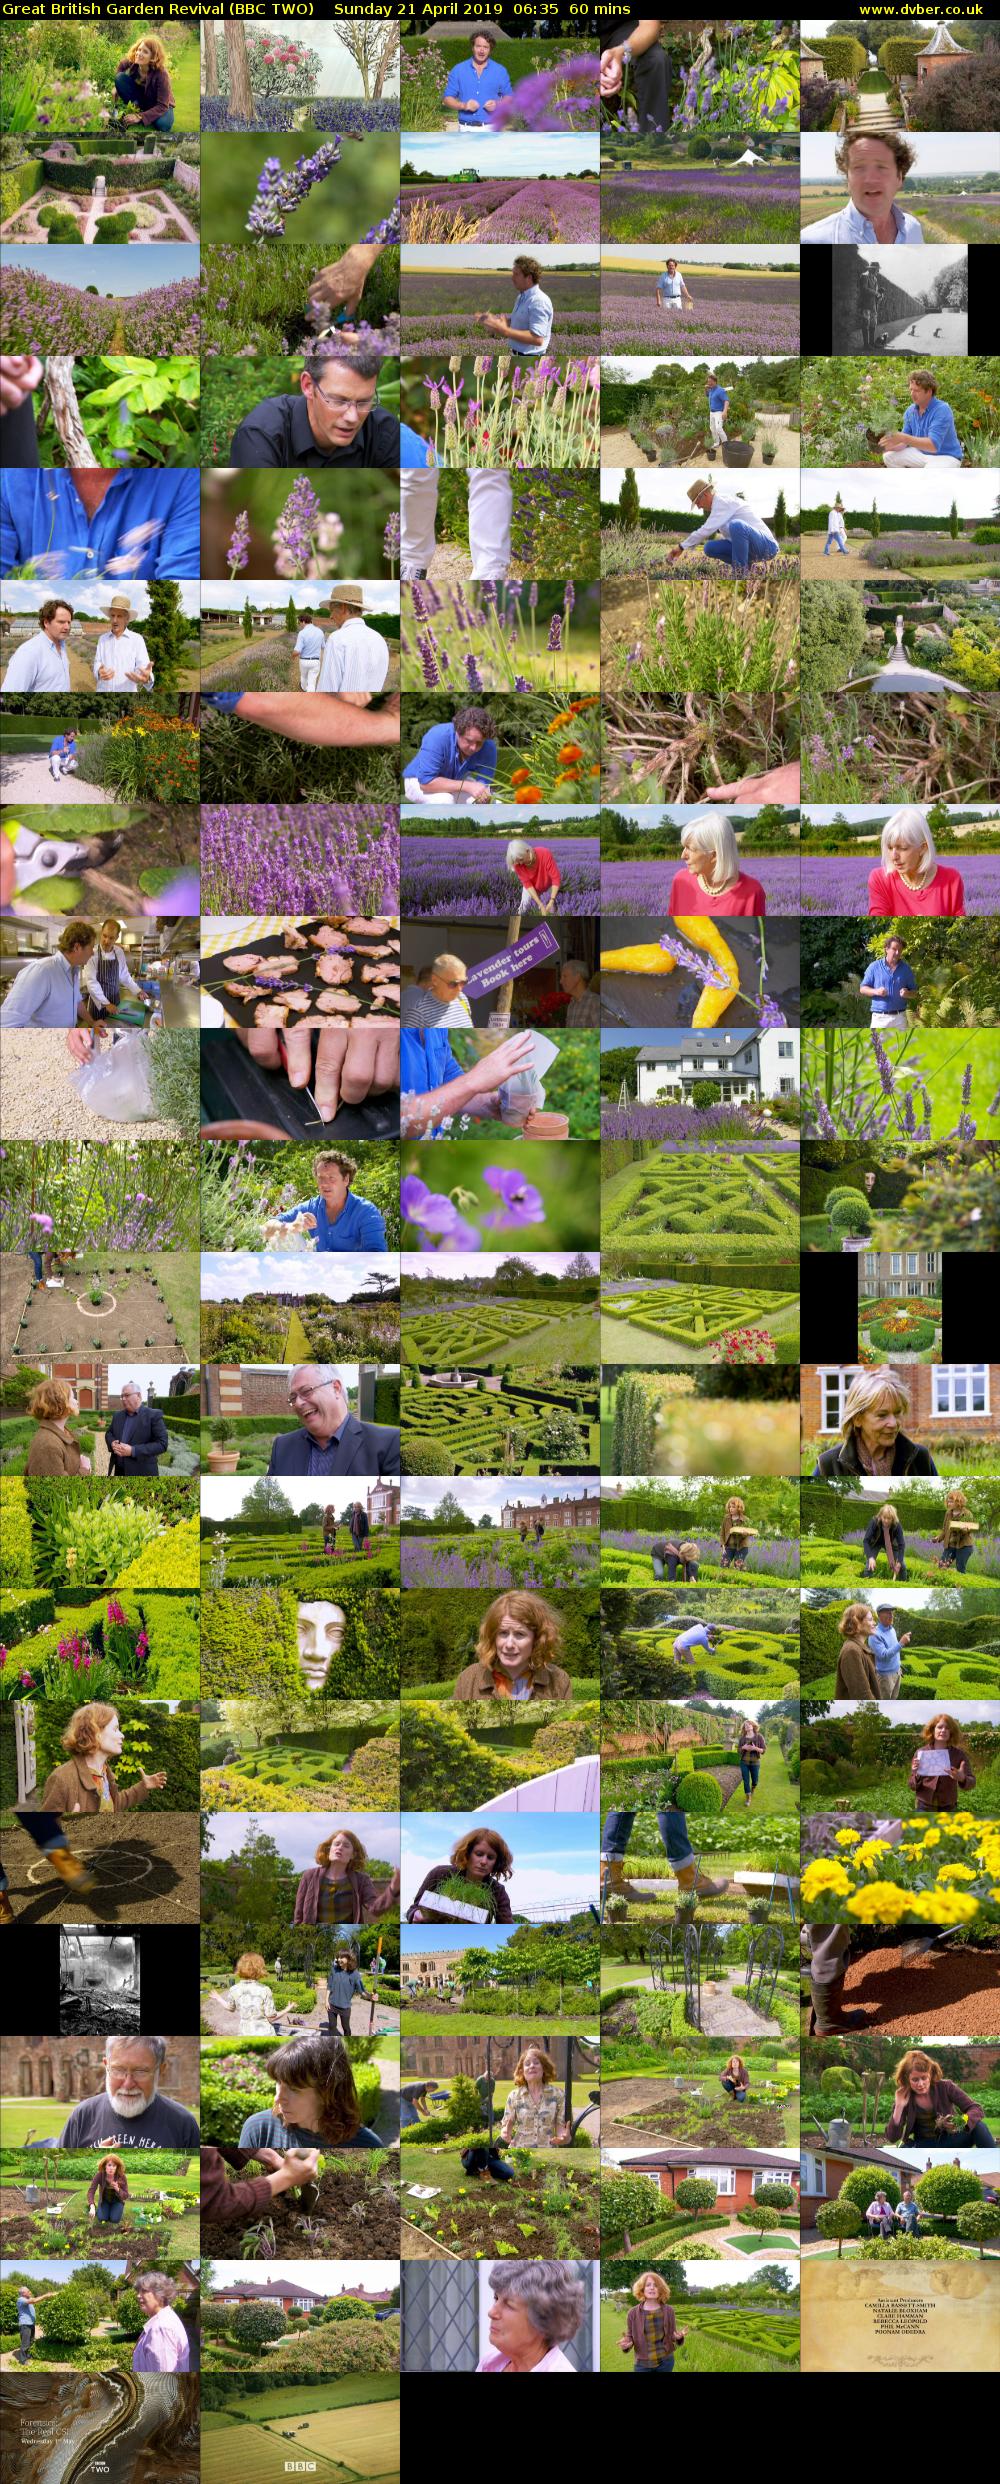 Great British Garden Revival (BBC TWO) Sunday 21 April 2019 06:35 - 07:35